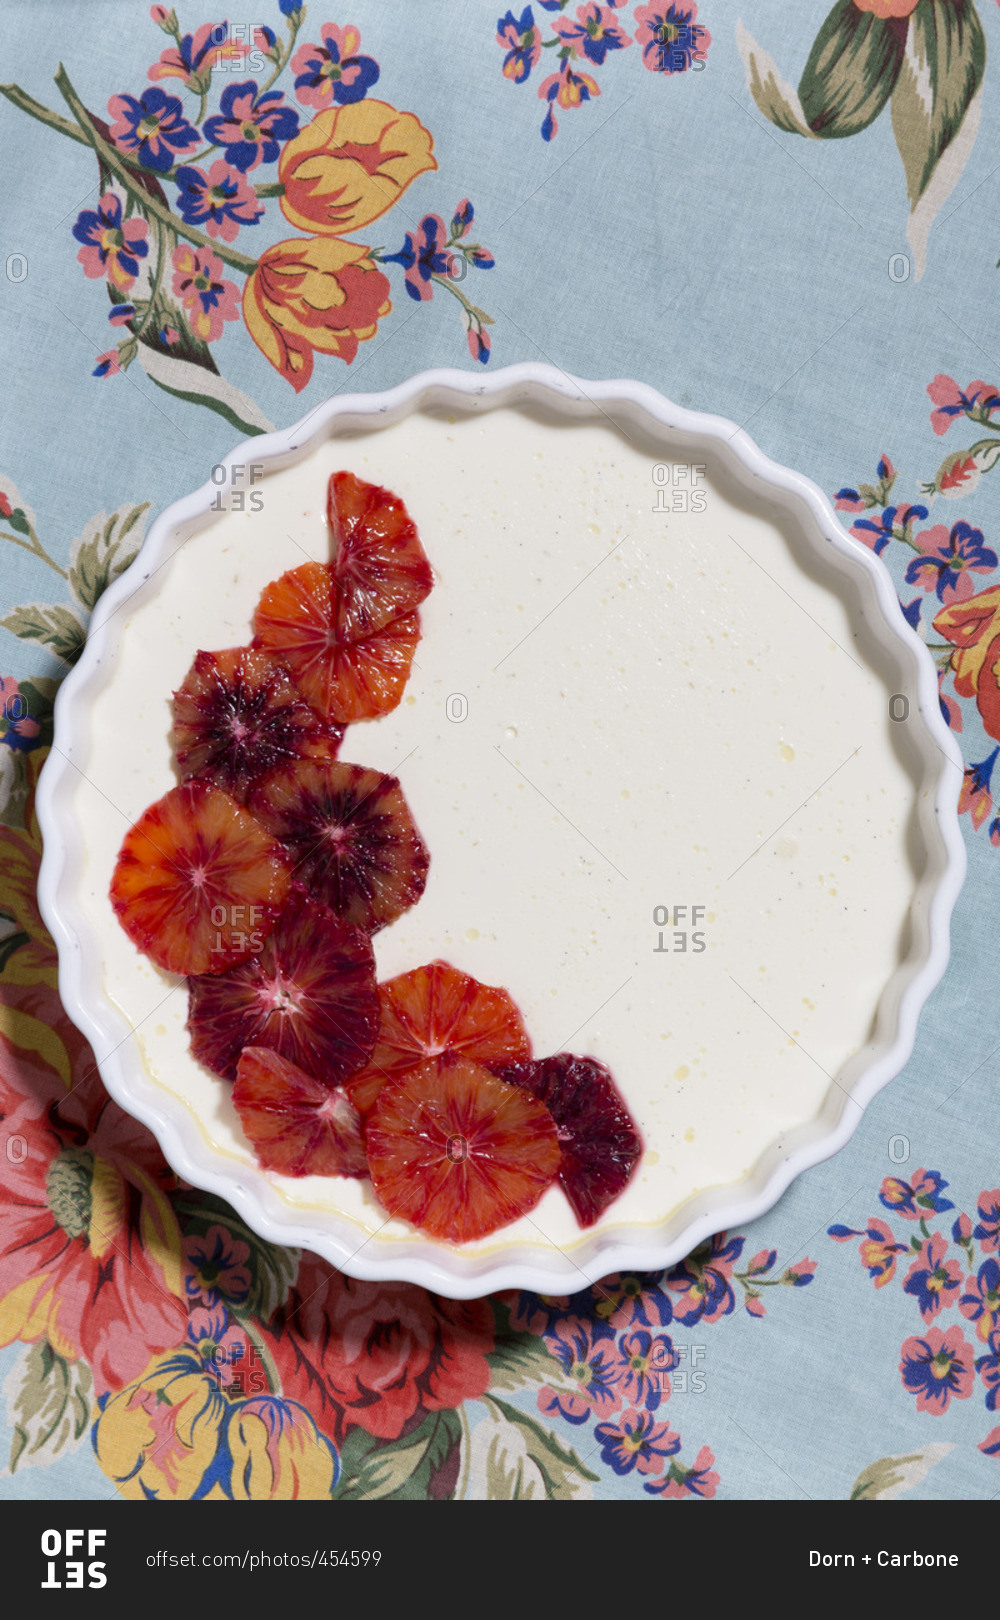 Blood orange dessert in a pie plate on a floral tablecloth